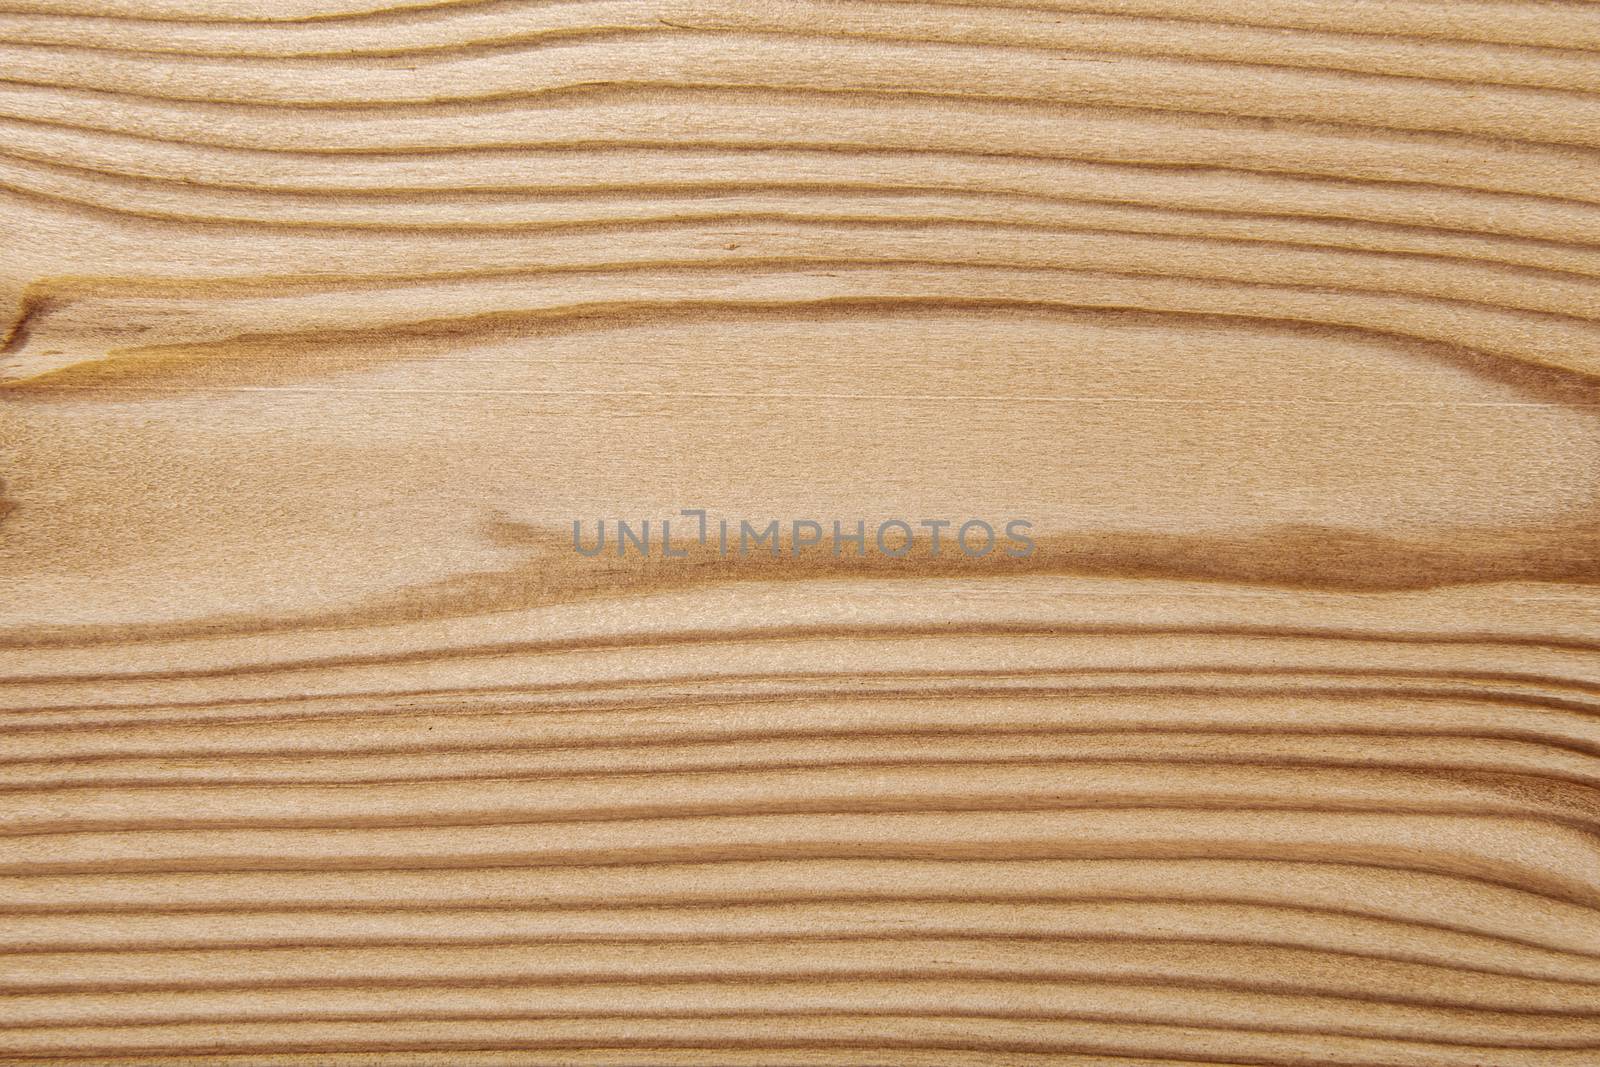 Wood texture with natural pattern. A fragment of a wooden panel